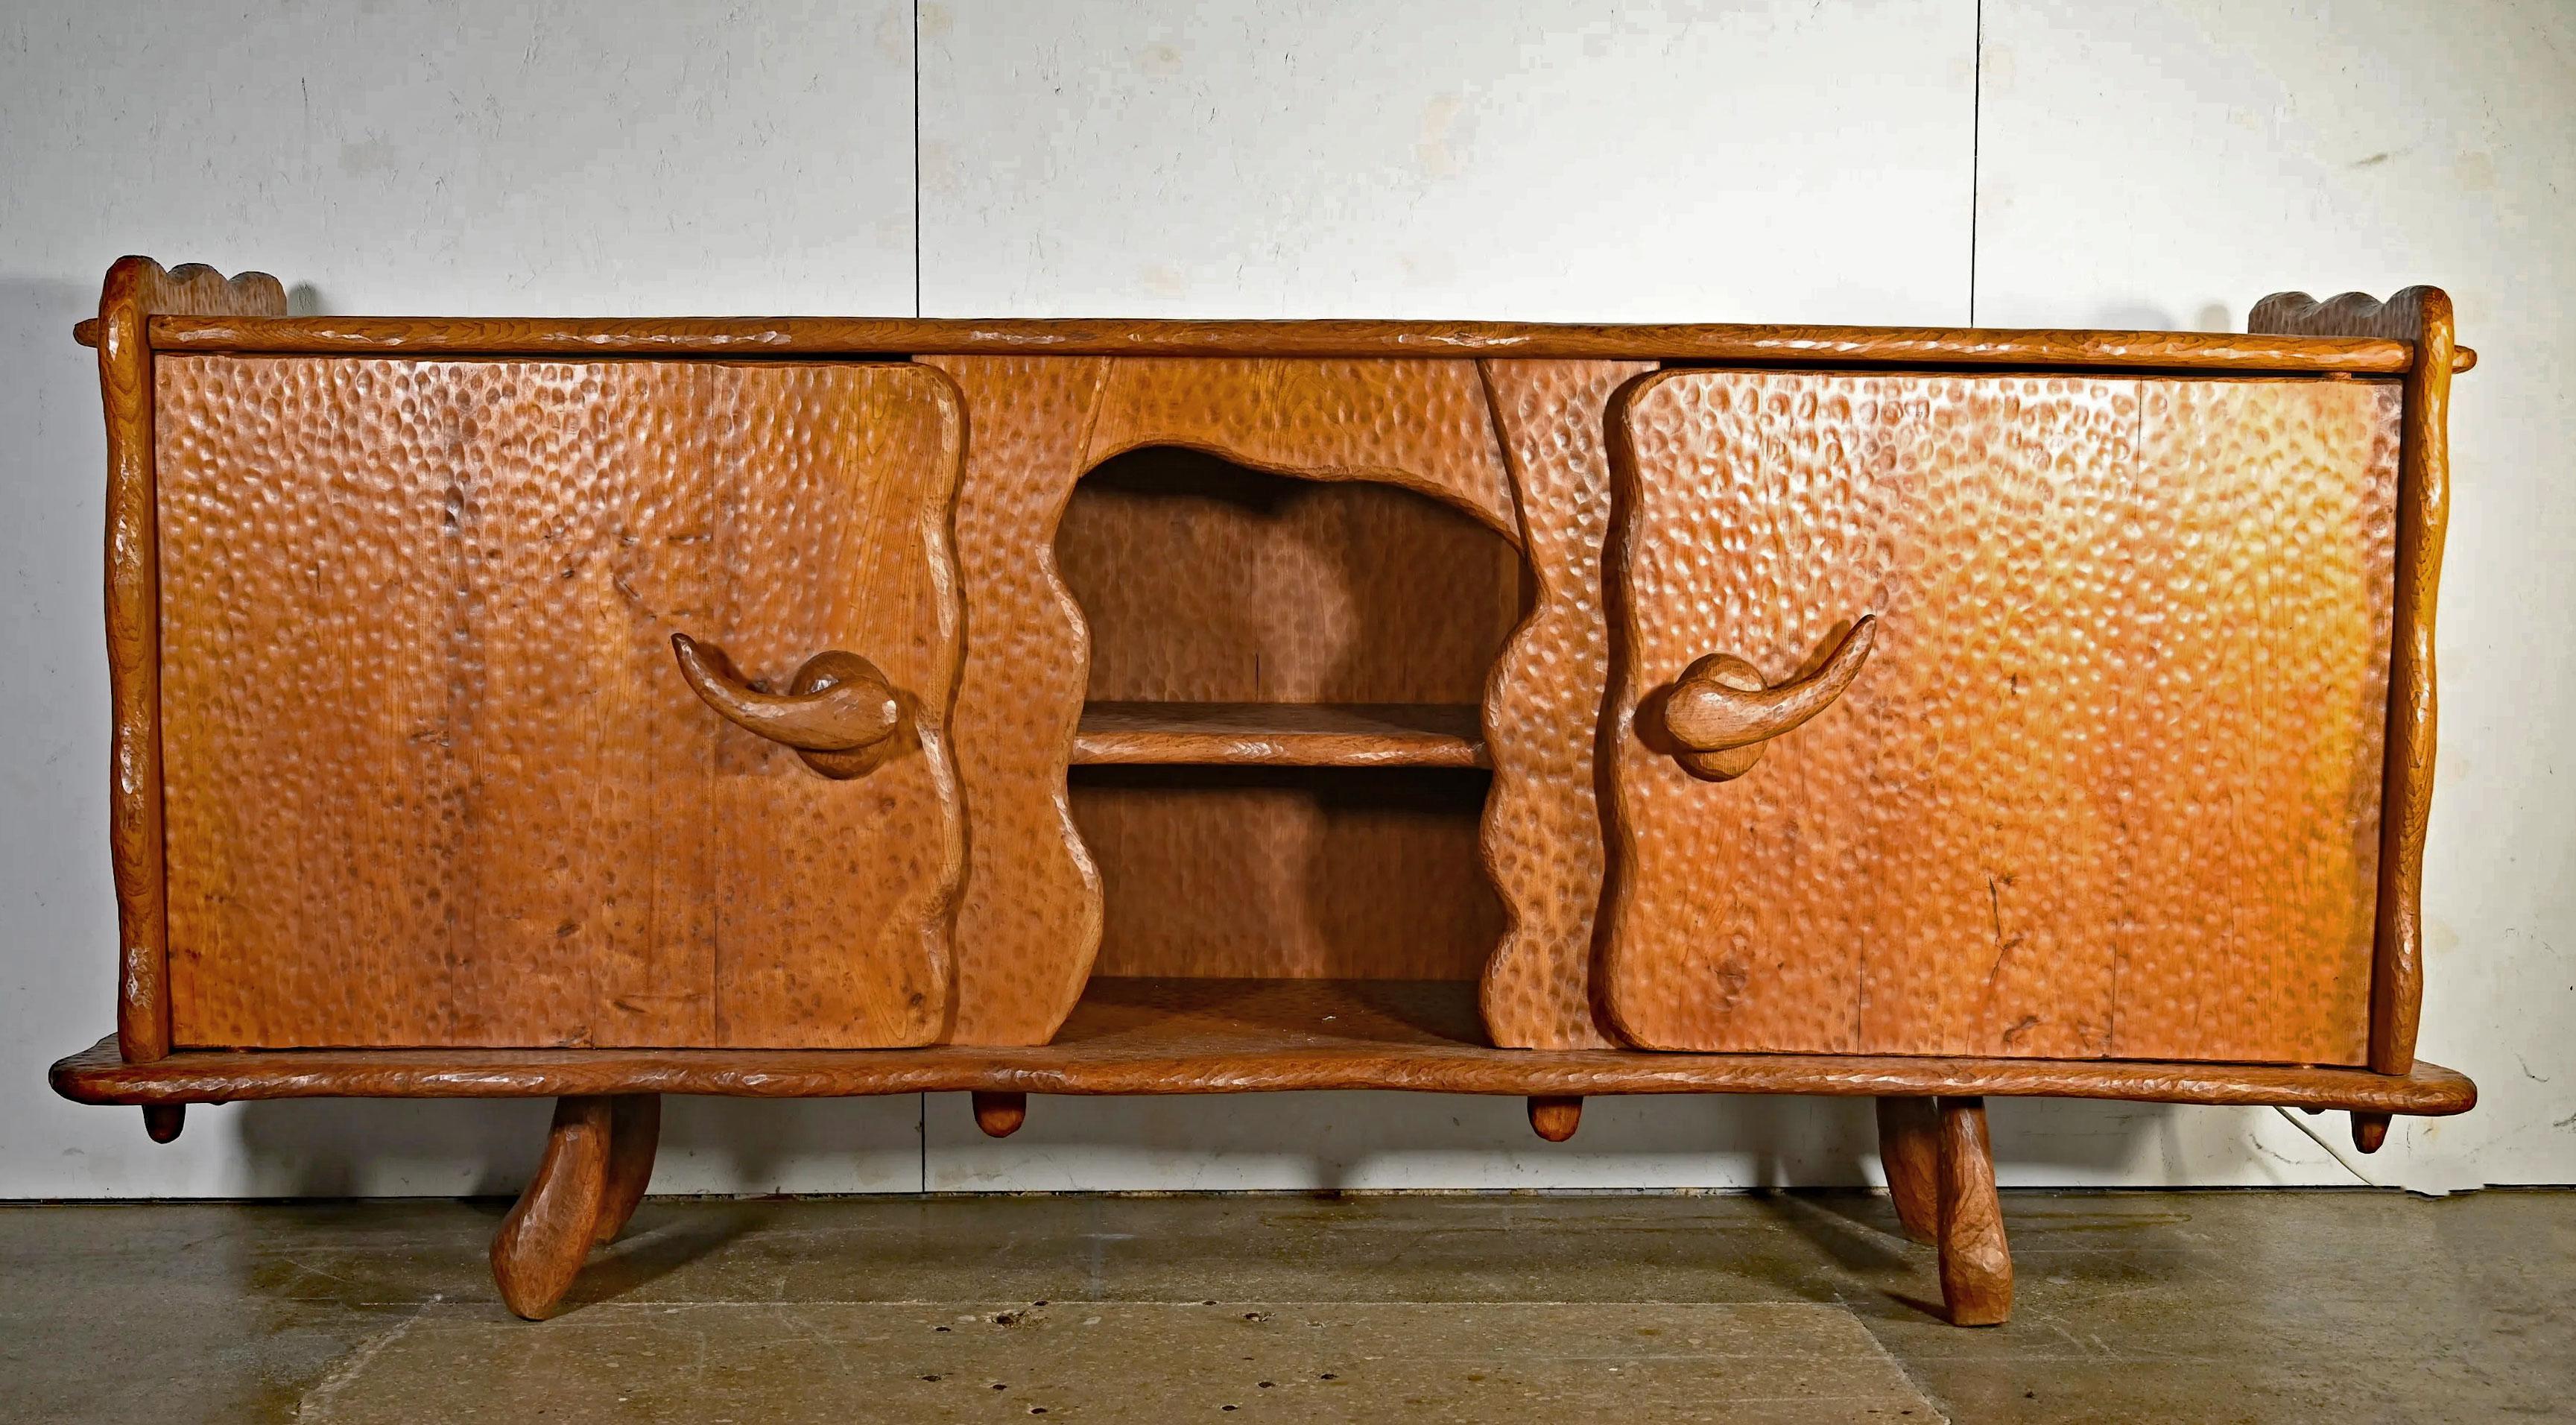 Original  large brutalist sideboard  in solid elm circa 1950/1960
interesting gouge work, key assembly
not a nail, not a dot of glue, disassembles and reassembles easily
nice cabinet work